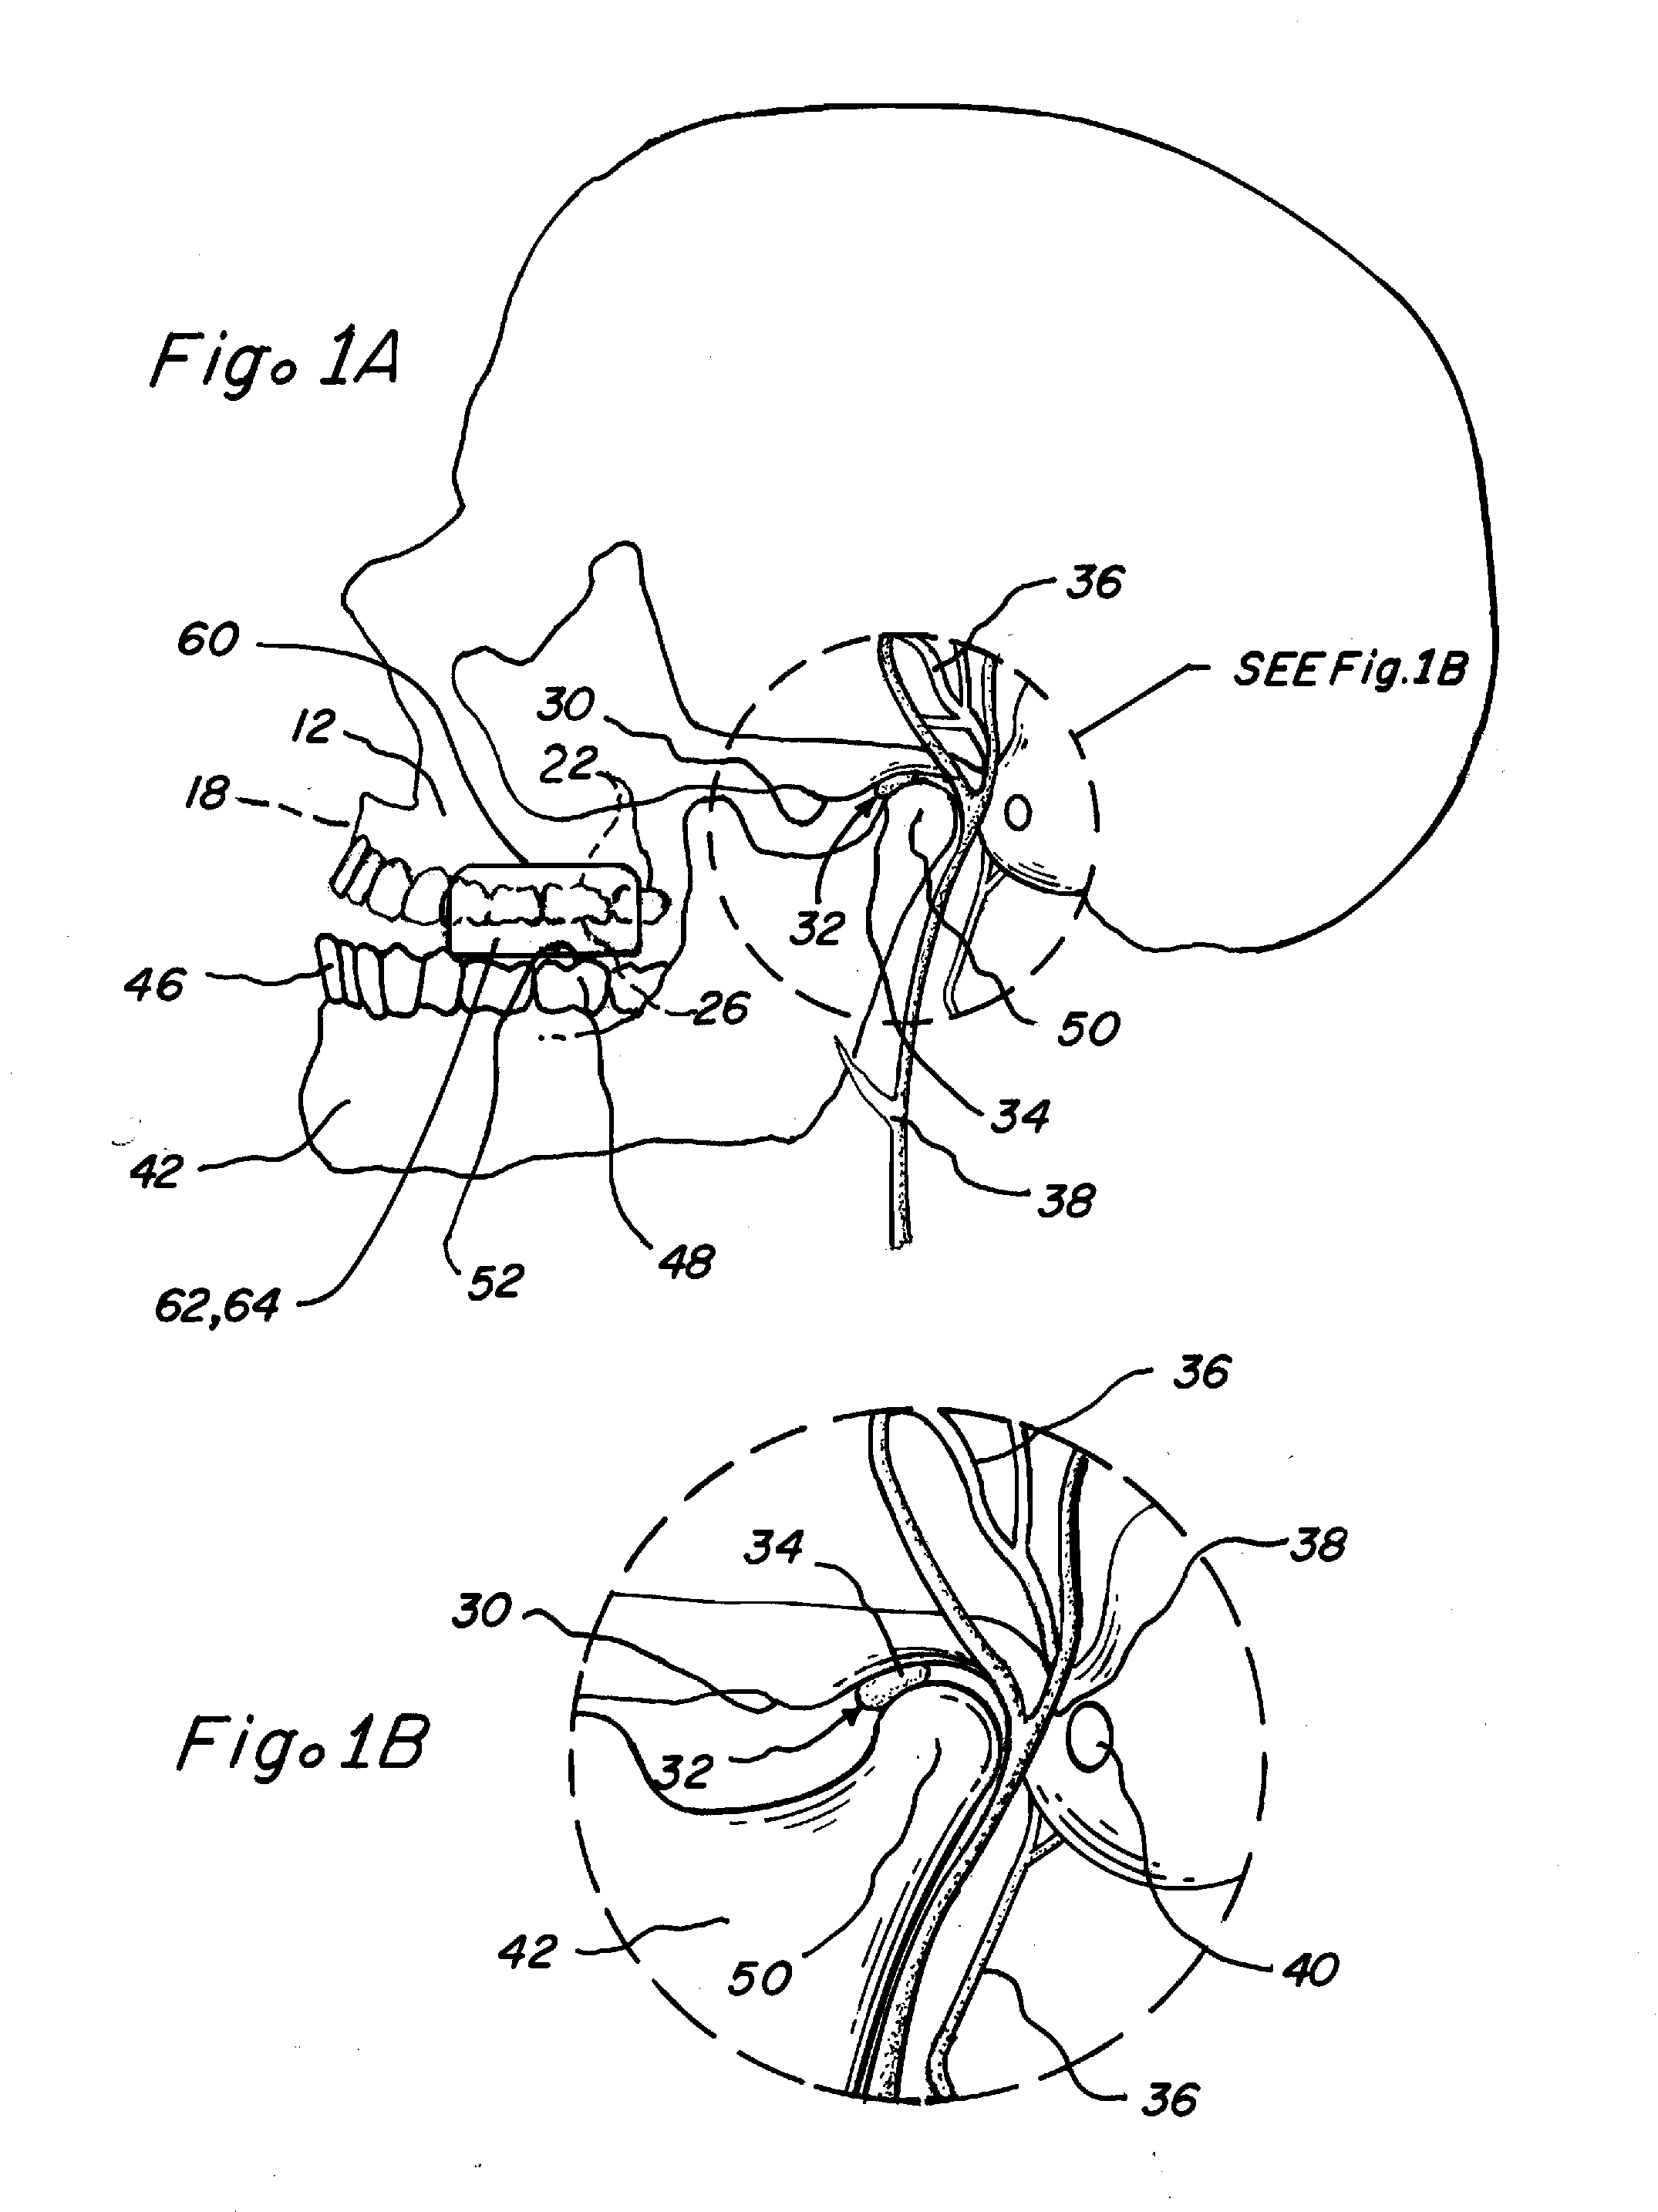 Methods and Apparatus for Reduction of Cortisol